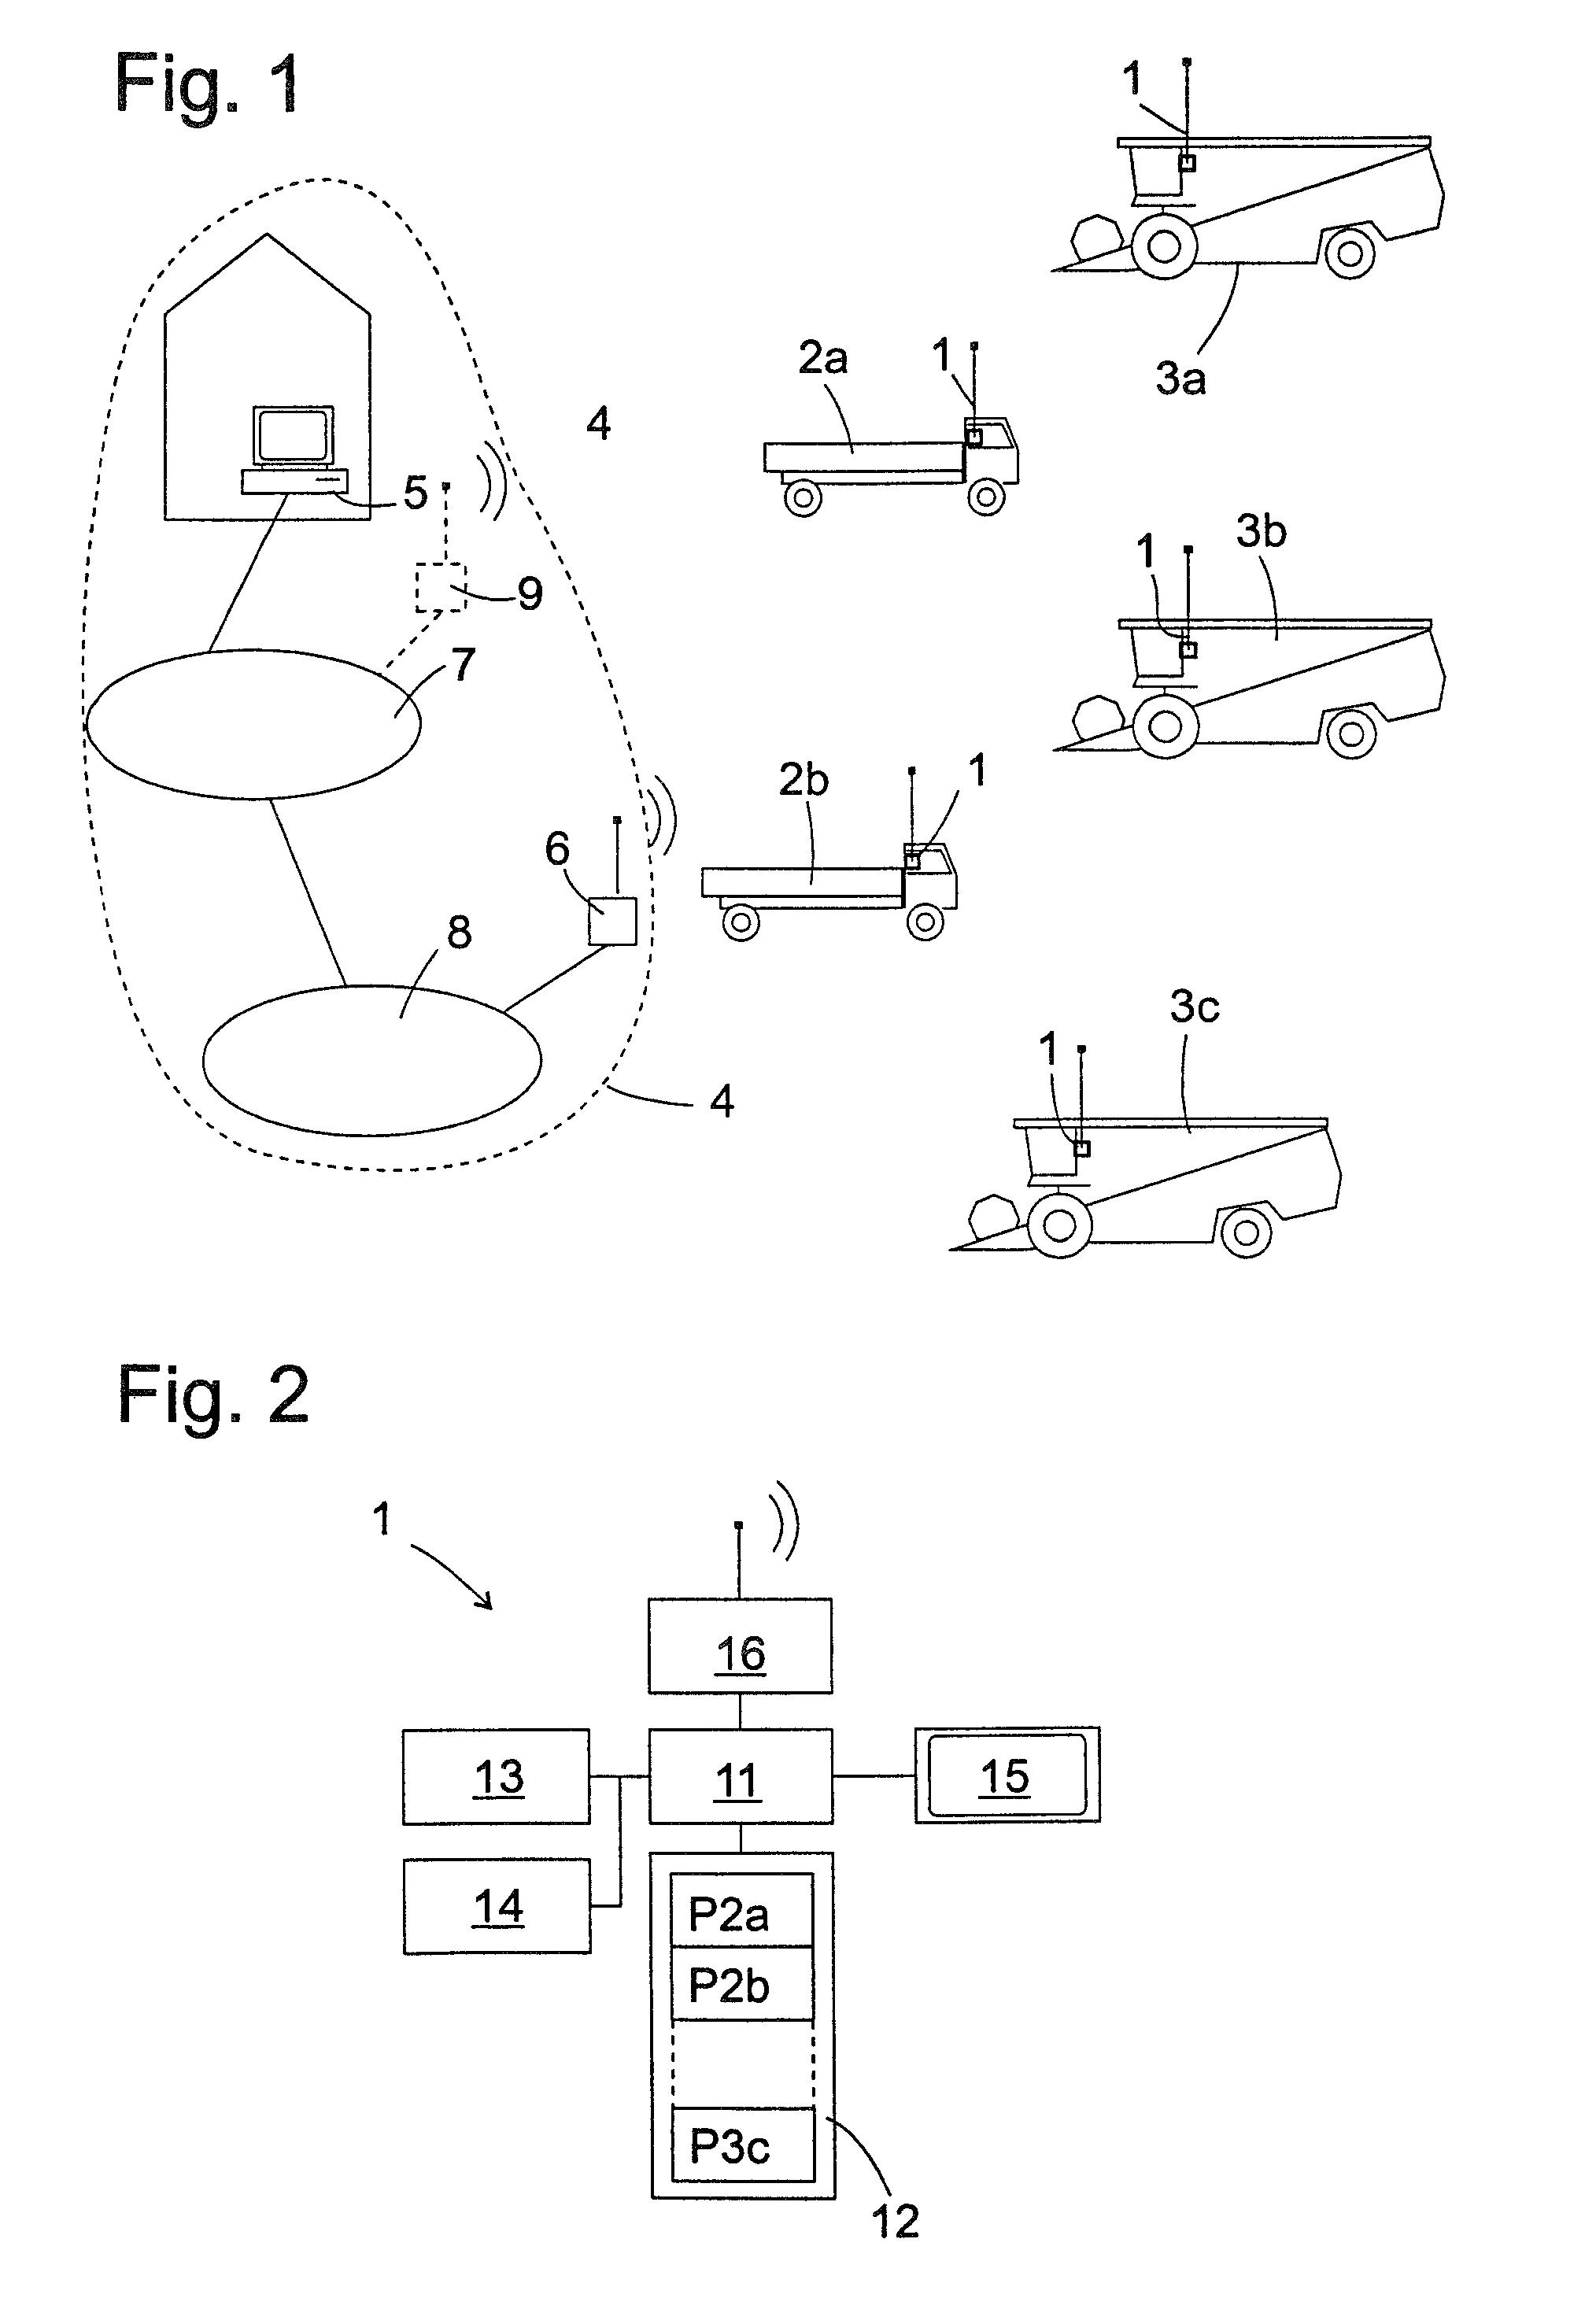 Communication network and operating method for agricultural working machines